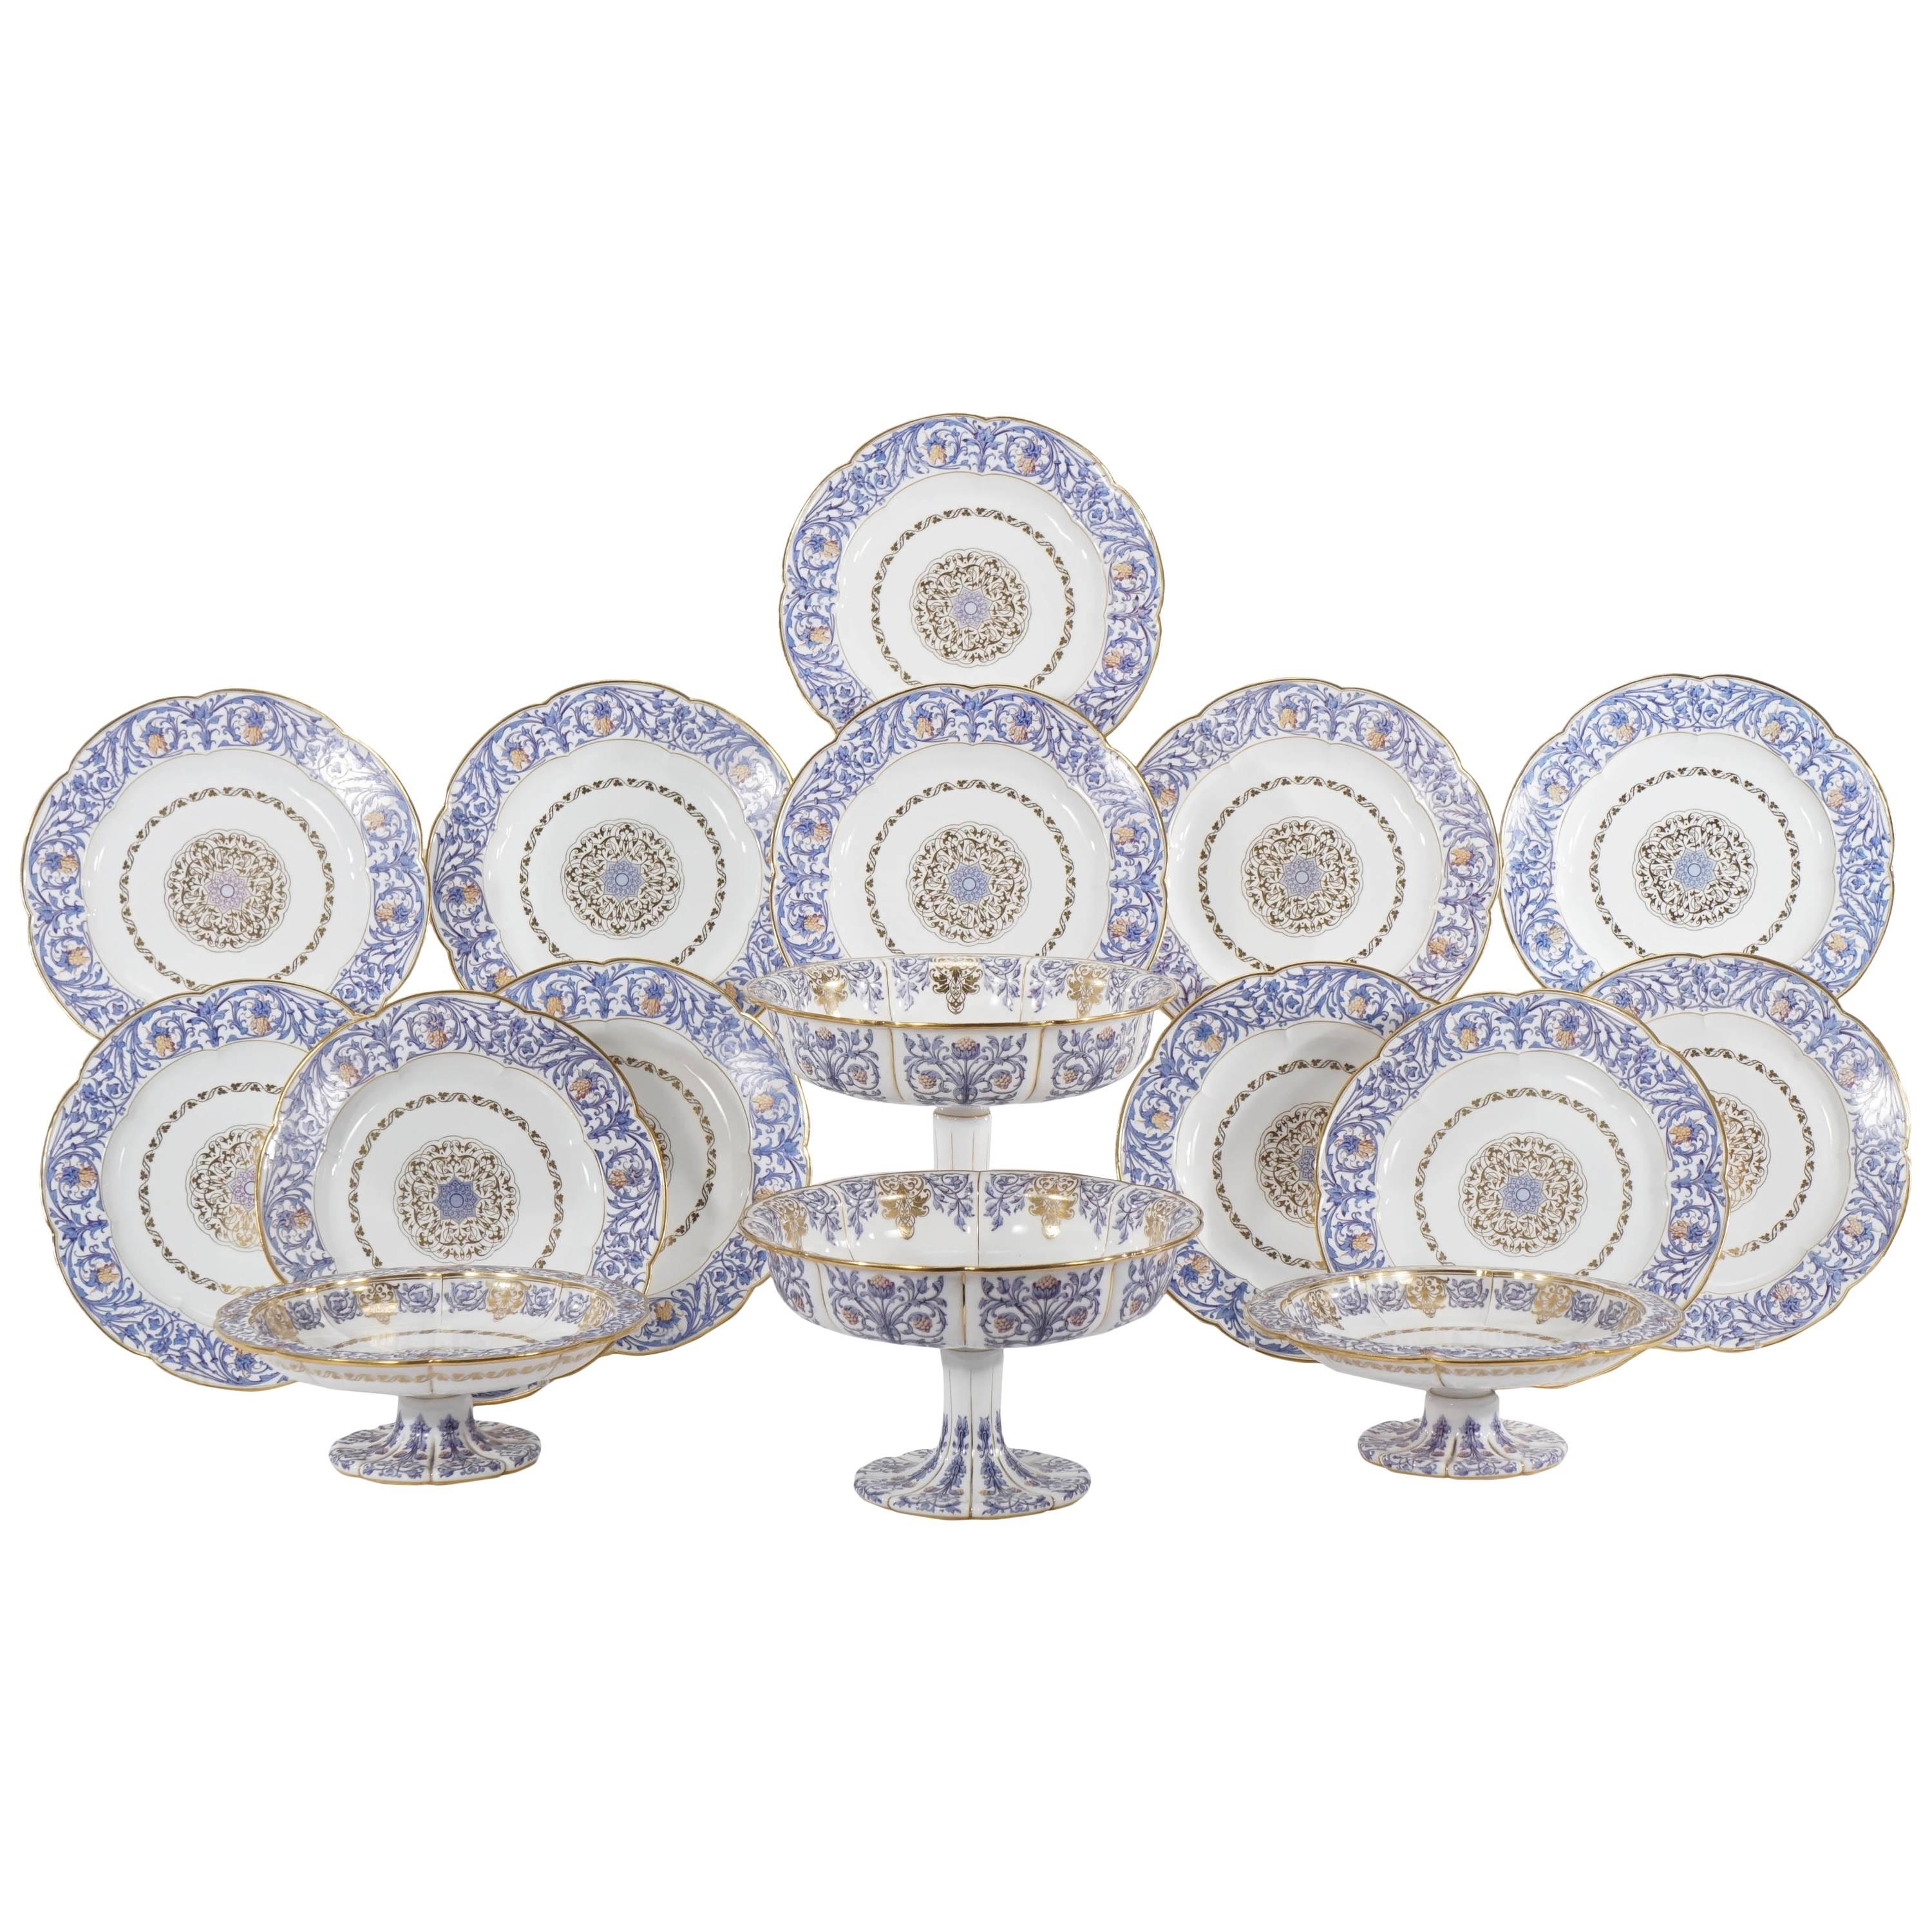 19th Century Sevres Neoclassical Blue and Gold Dessert Service with 16 Pieces